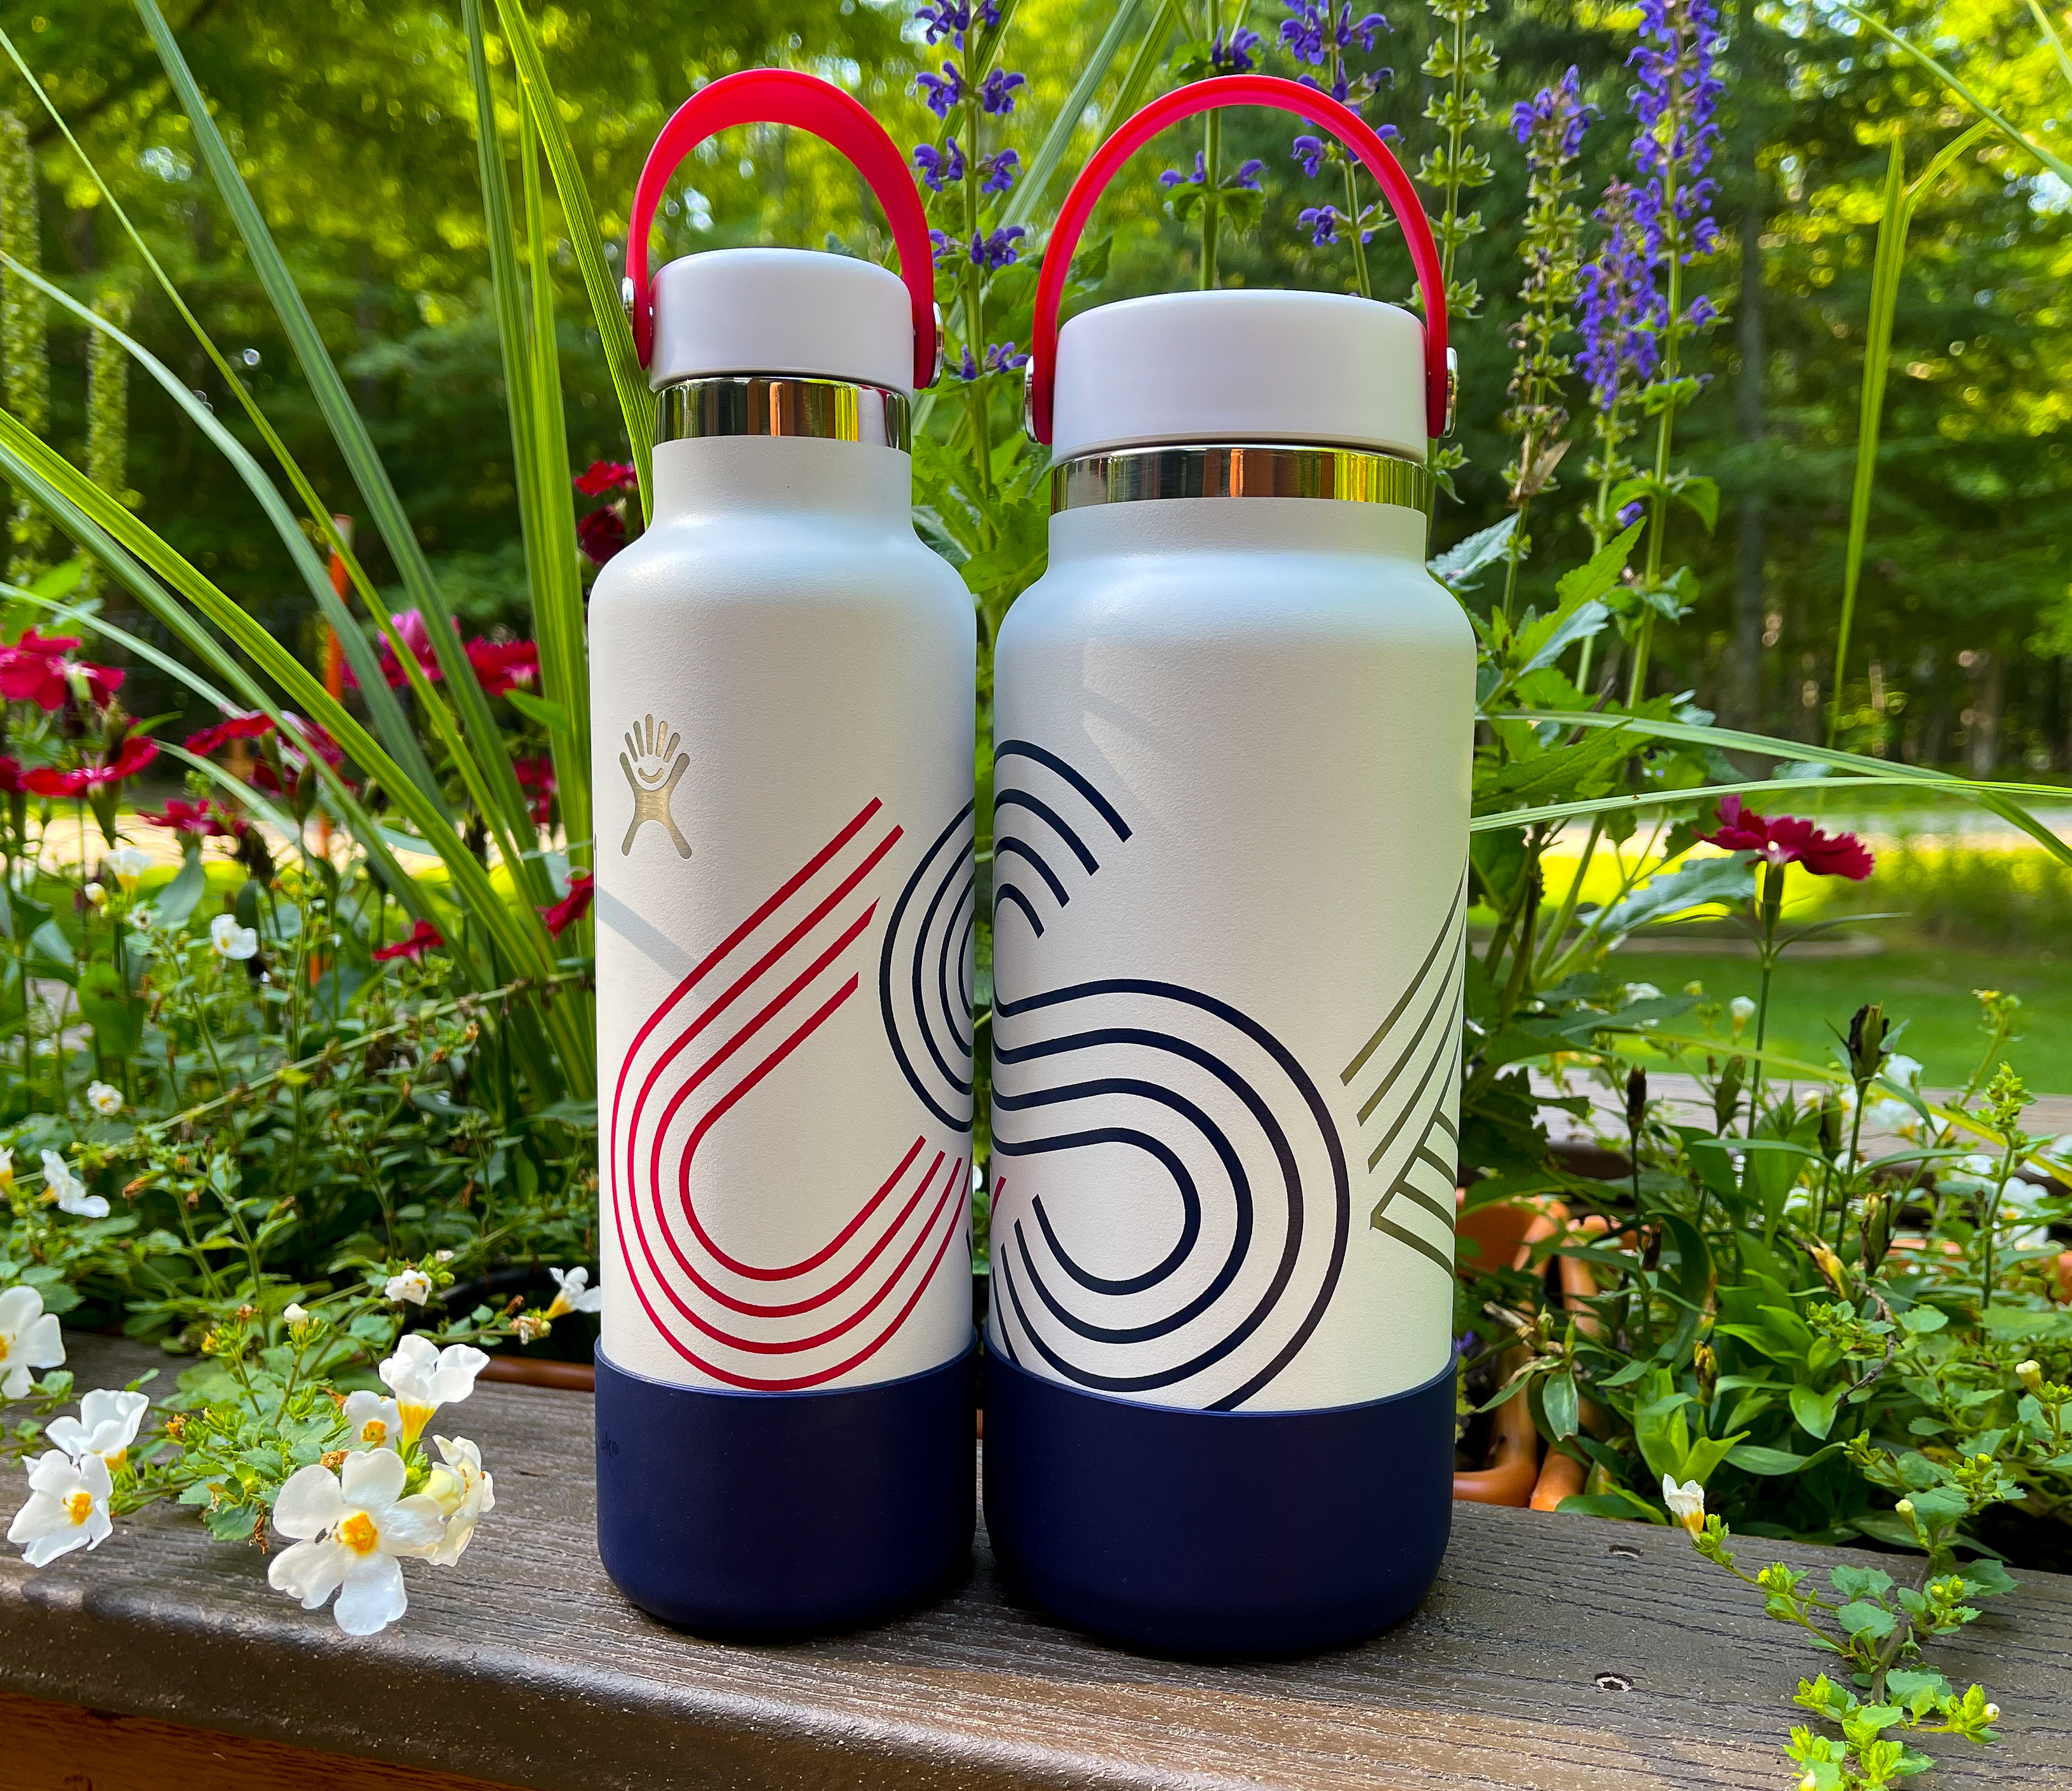 Hydro Flask owner Helen of Troy says shoppers are turning to tumblers